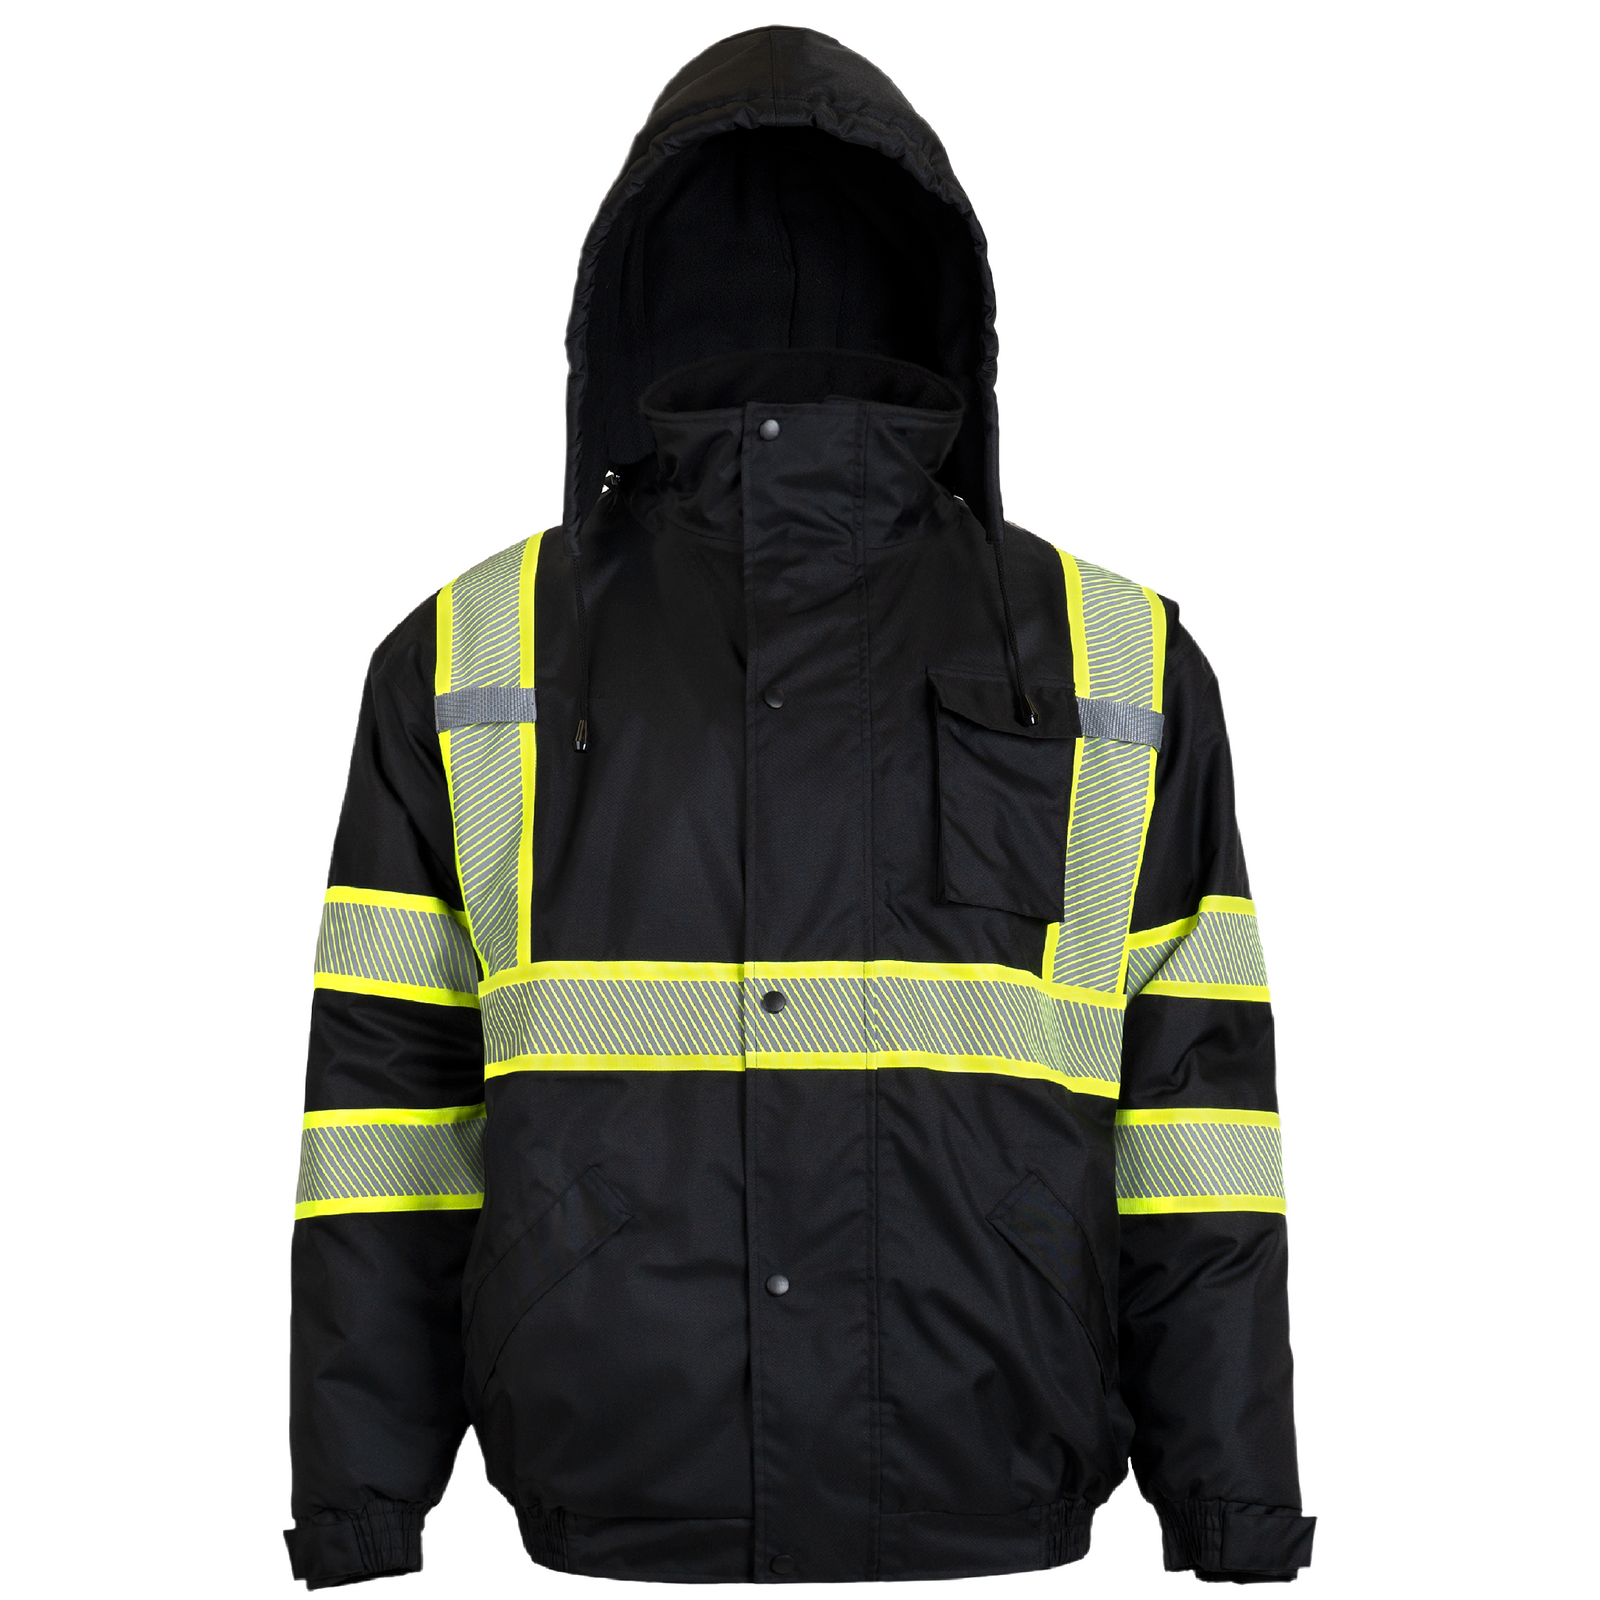 Front view of the black Hi-vis safety bomber work jacket with heat transfer reflective tapes and detachable hoodie